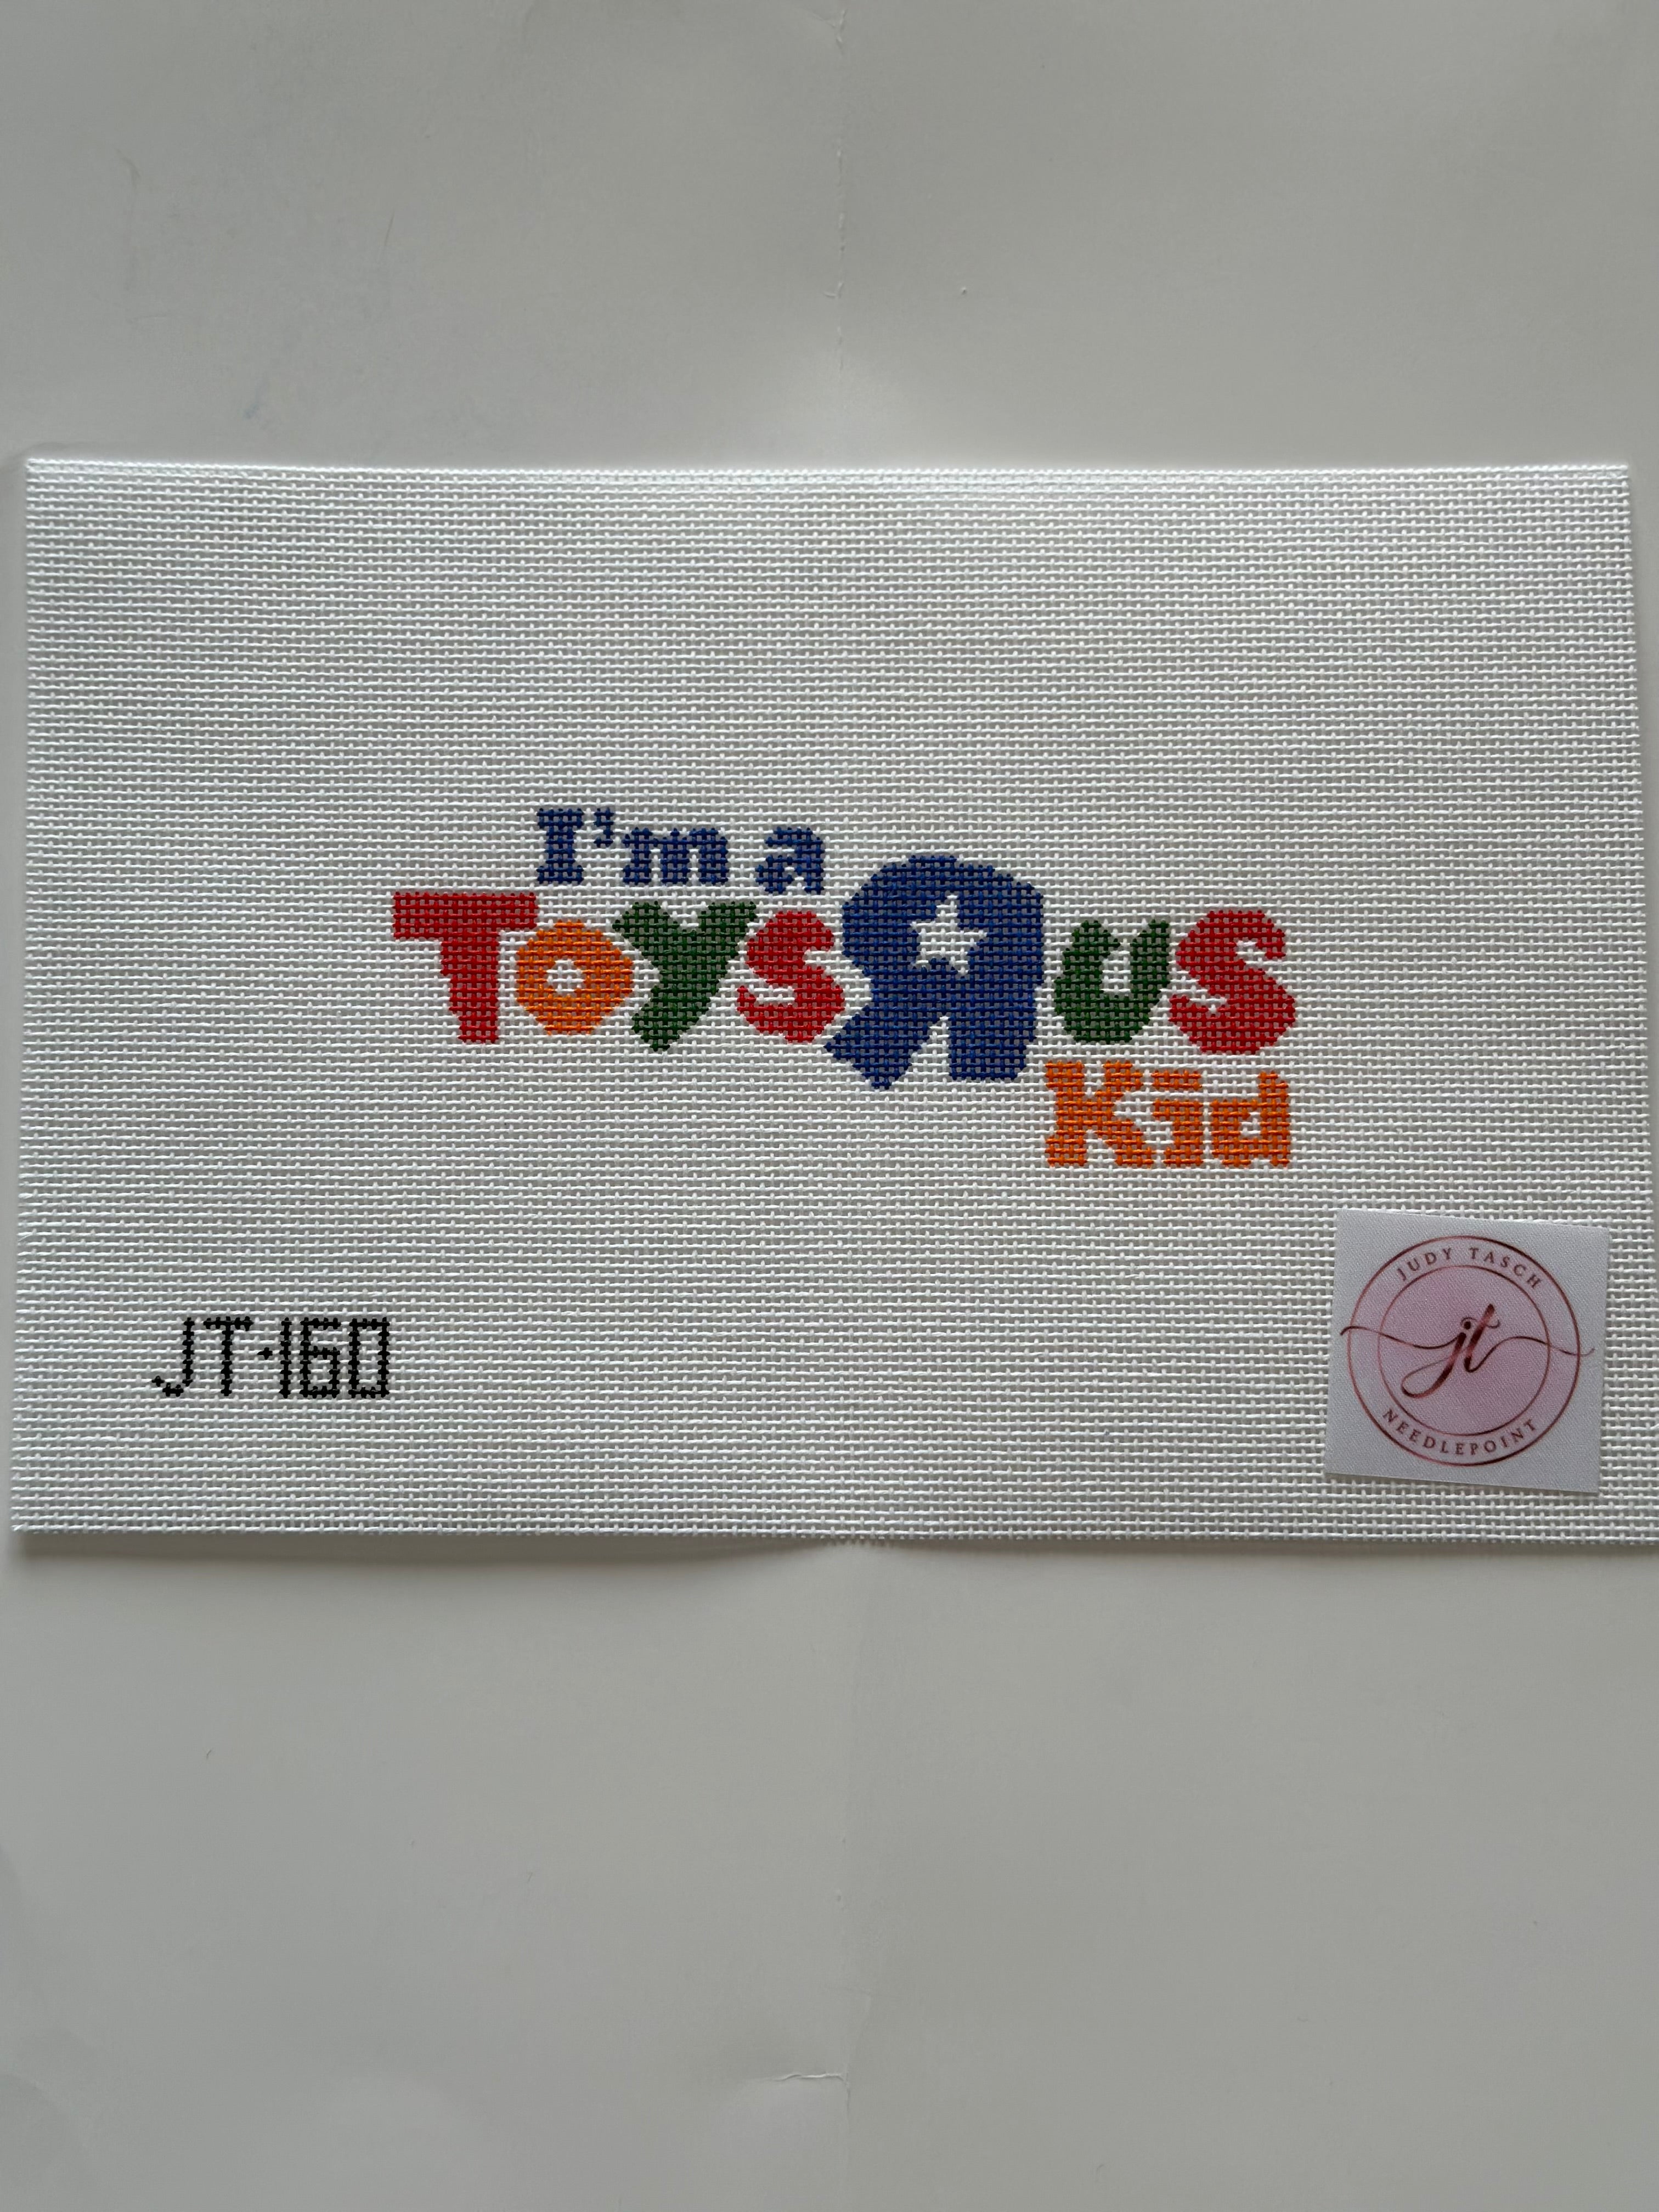 Toys R Us Kid - The Flying Needles